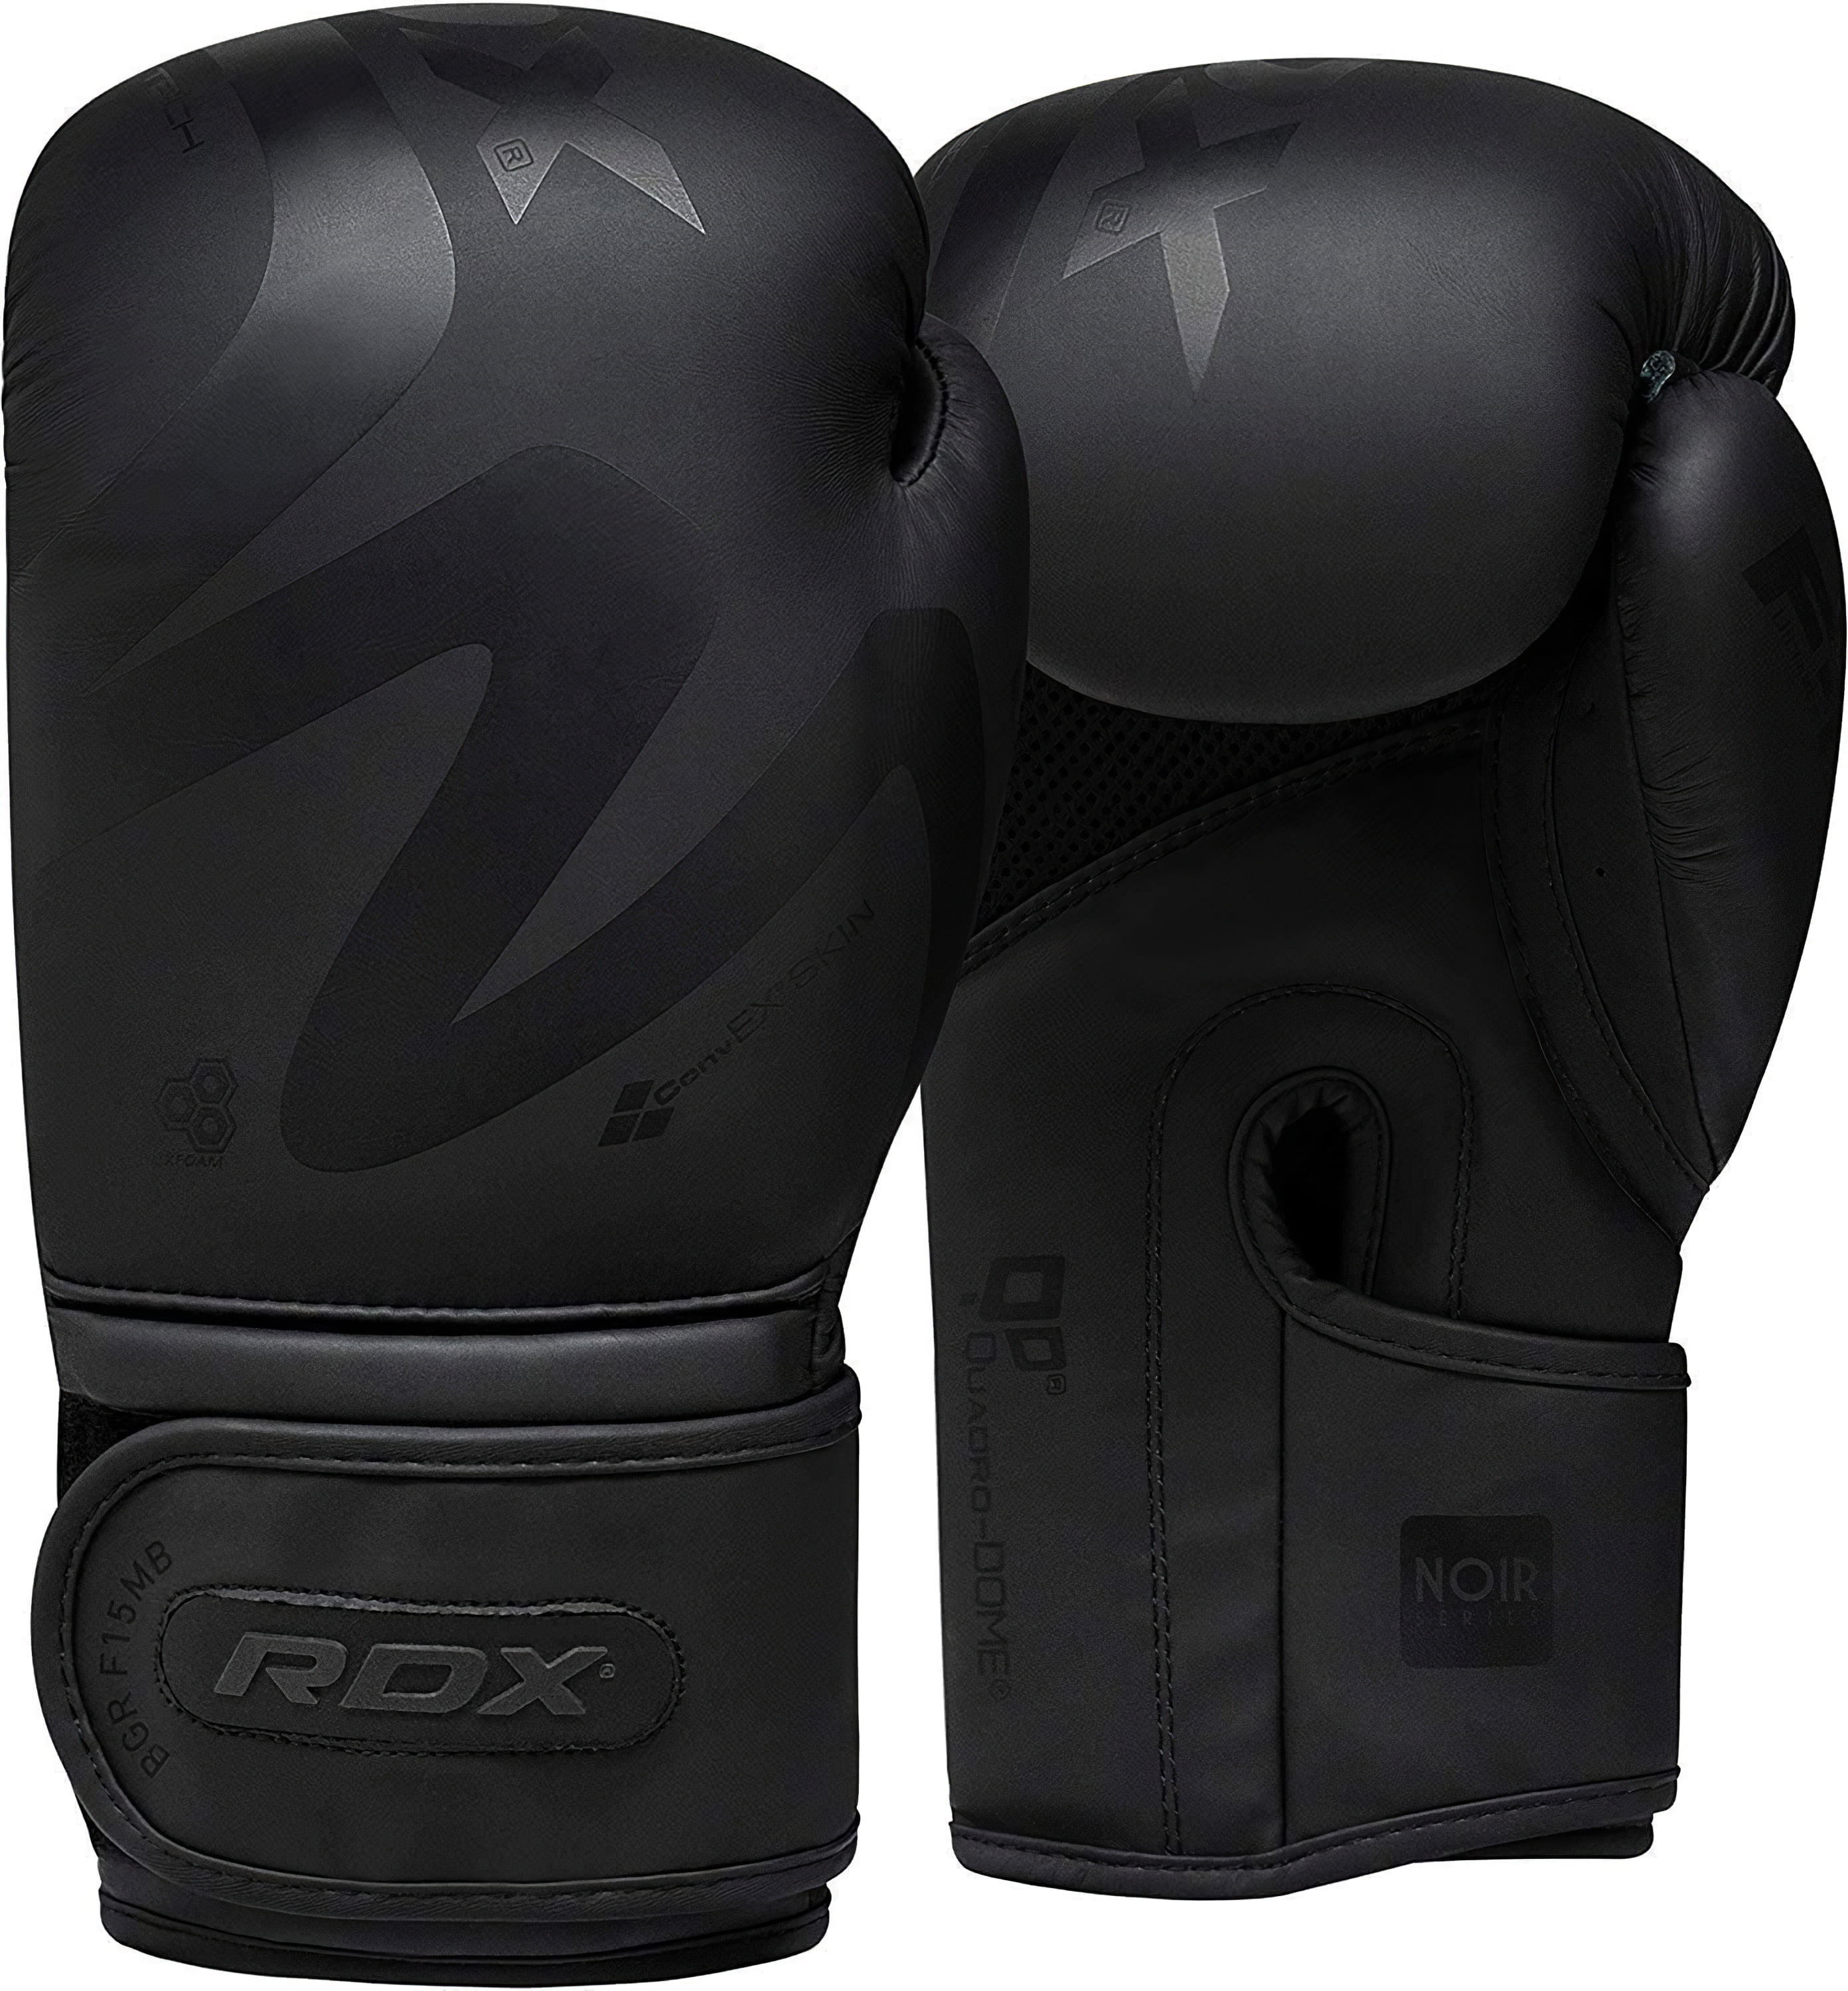 Boxing Gloves Training Leather Mitt Sparring Muay Thai Punch Bag Kickboxing